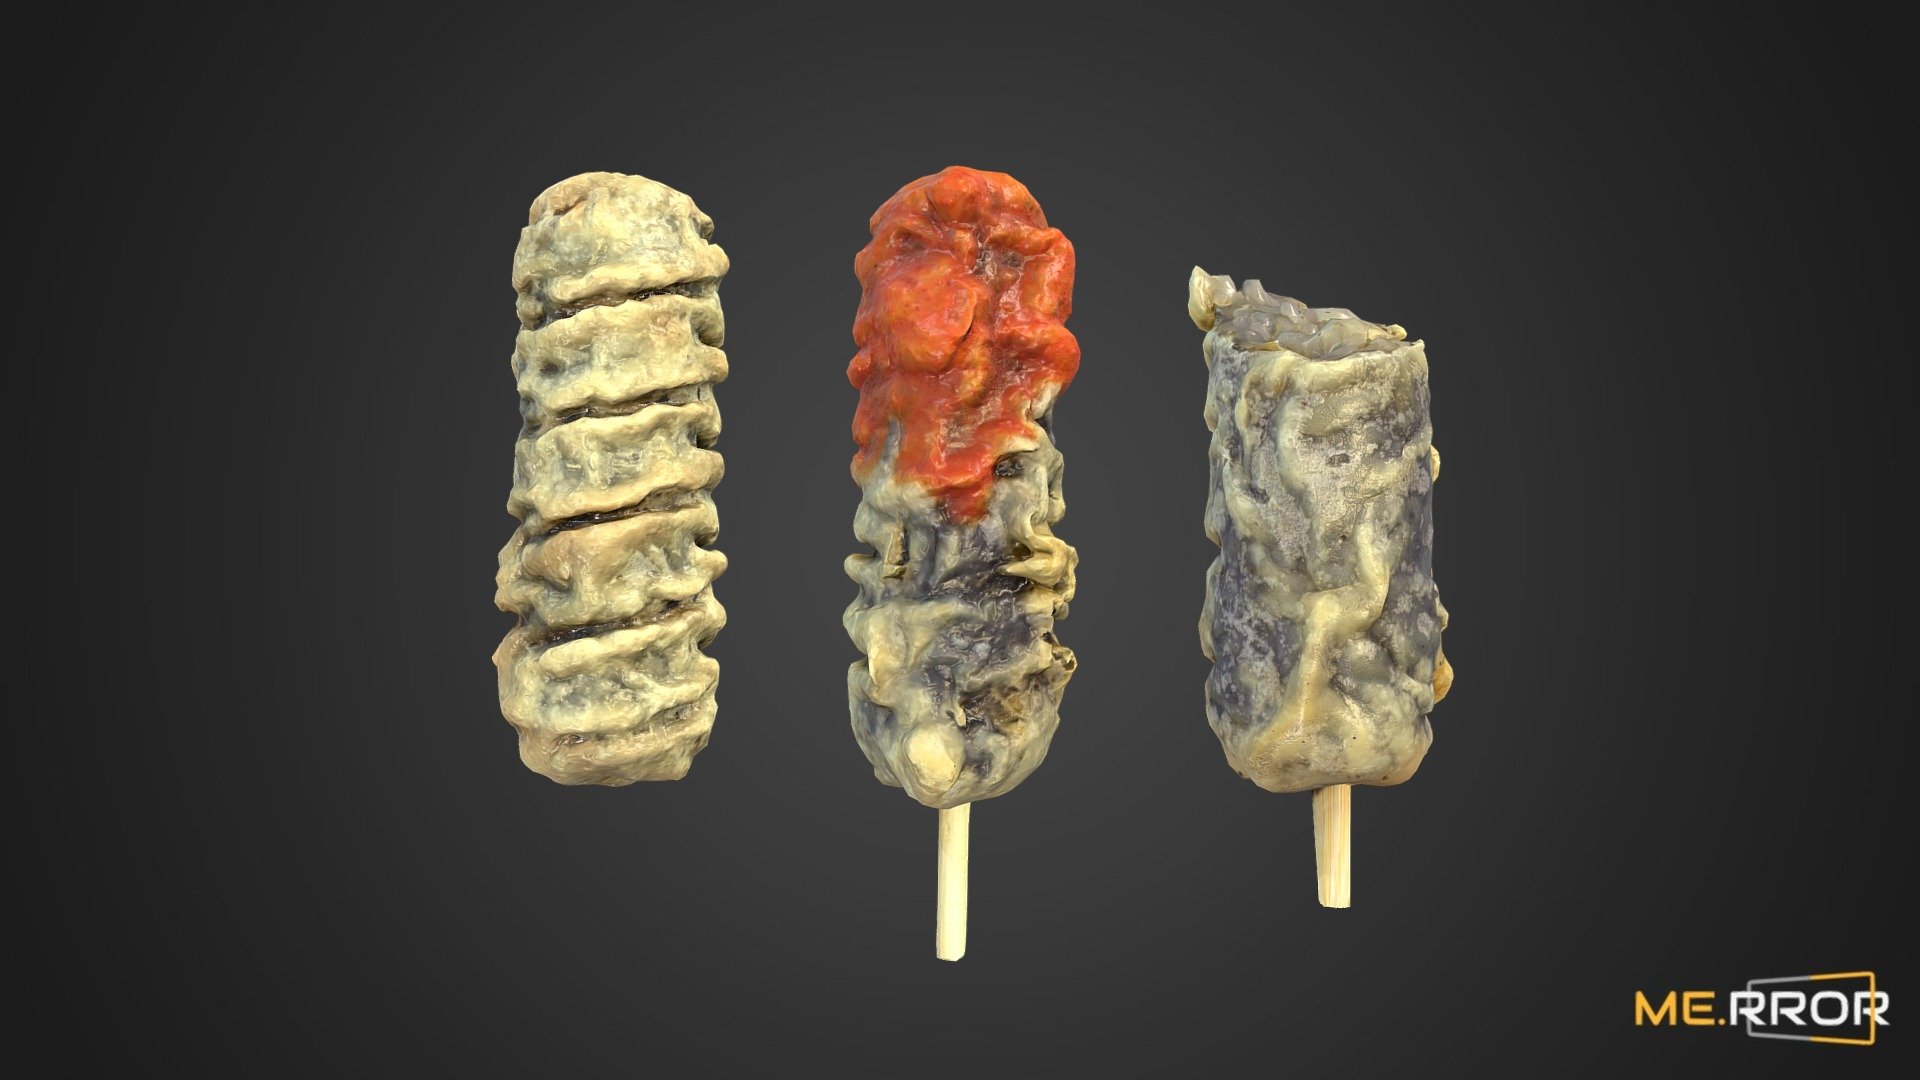 MERROR is a 3D Content PLATFORM which introduces various Asian assets to the 3D world


3DScanning #Photogrametry #ME.RROR - [Game-Ready] Fried Seaweed Roll Set - Buy Royalty Free 3D model by ME.RROR Studio (@merror) 3d model